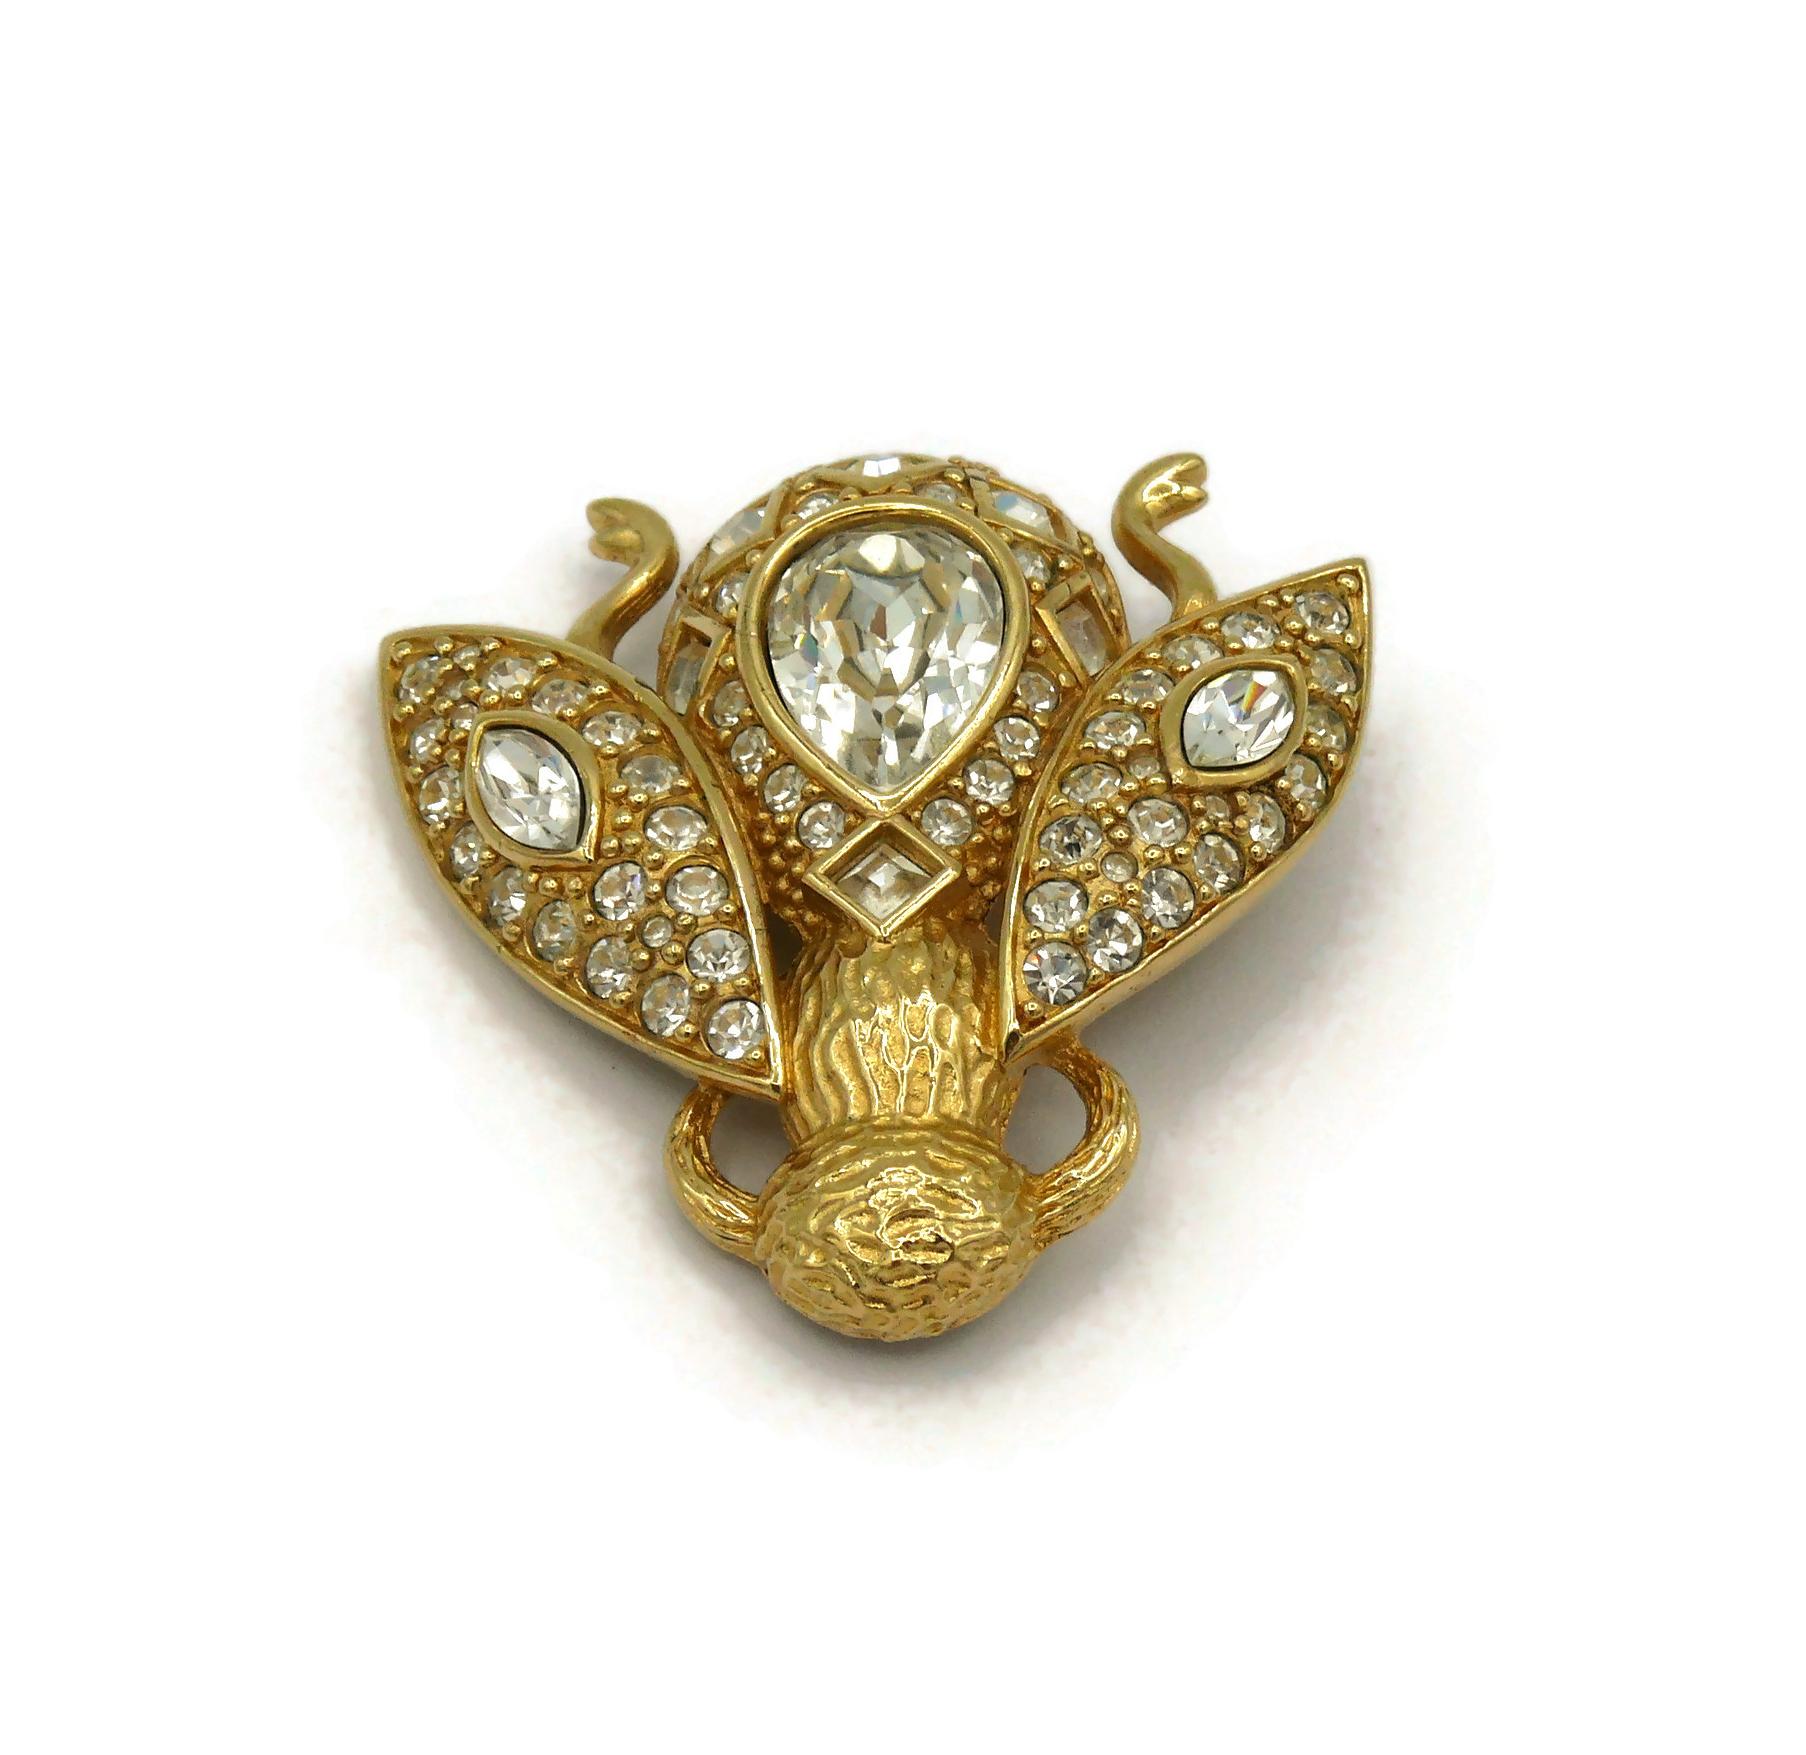 CHRISTIAN DIOR Vintage Iconic Jewelled Bee Brooch For Sale 2